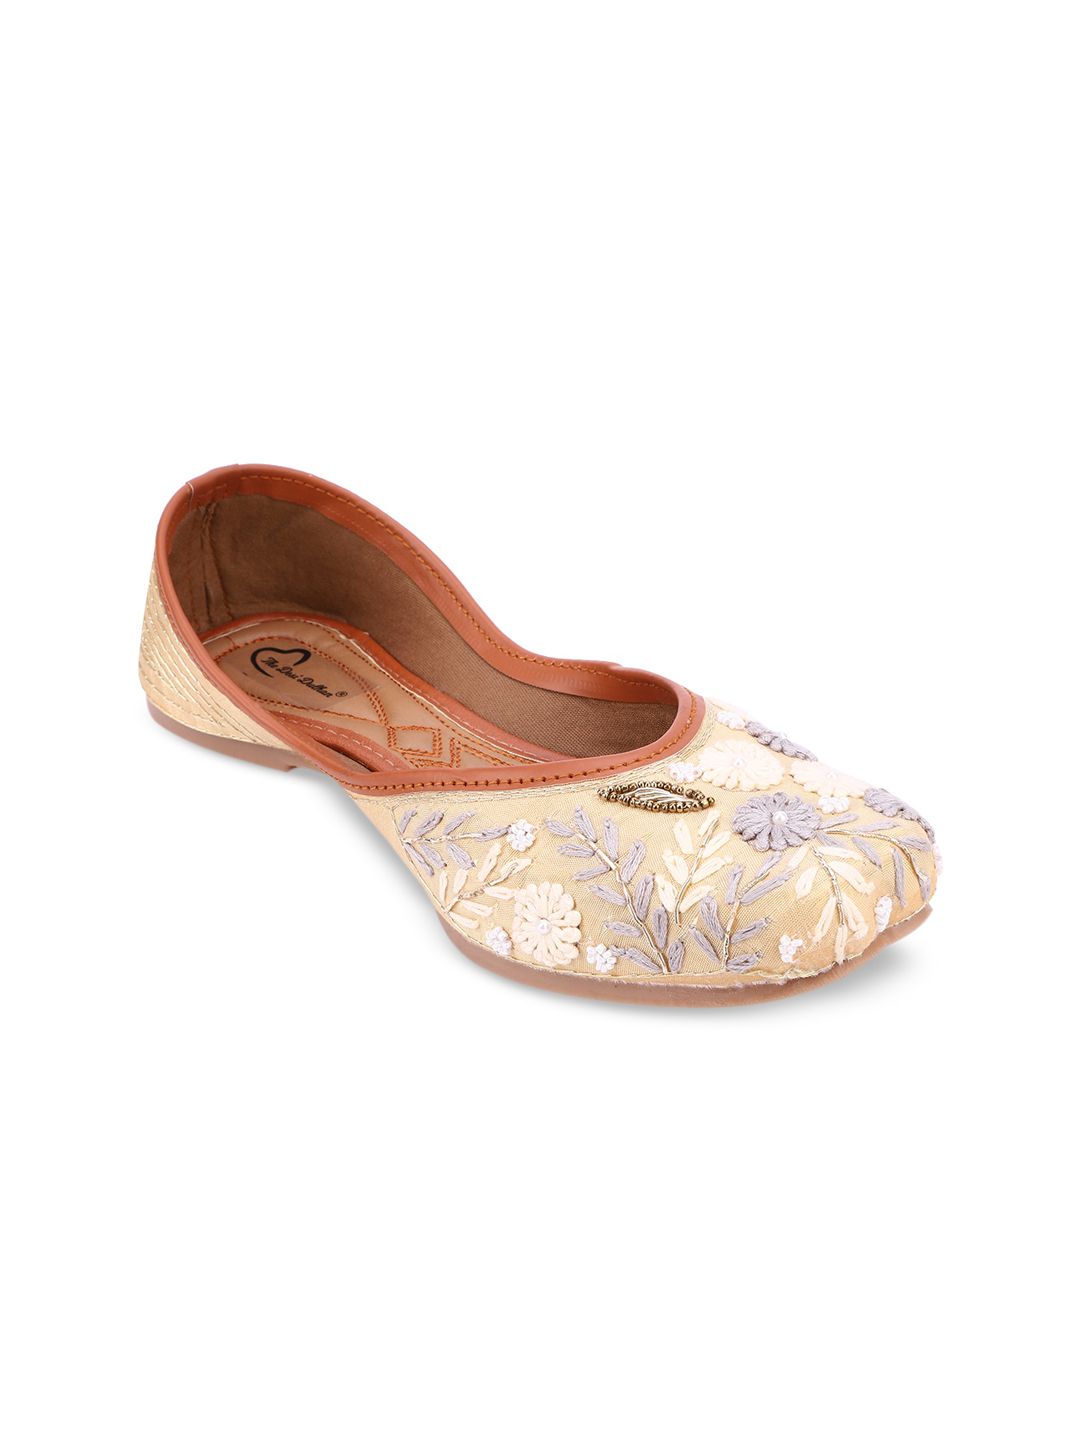 The Desi Dulhan Women Gold-Toned Textured Ethnic Mojaris Flats Price in India